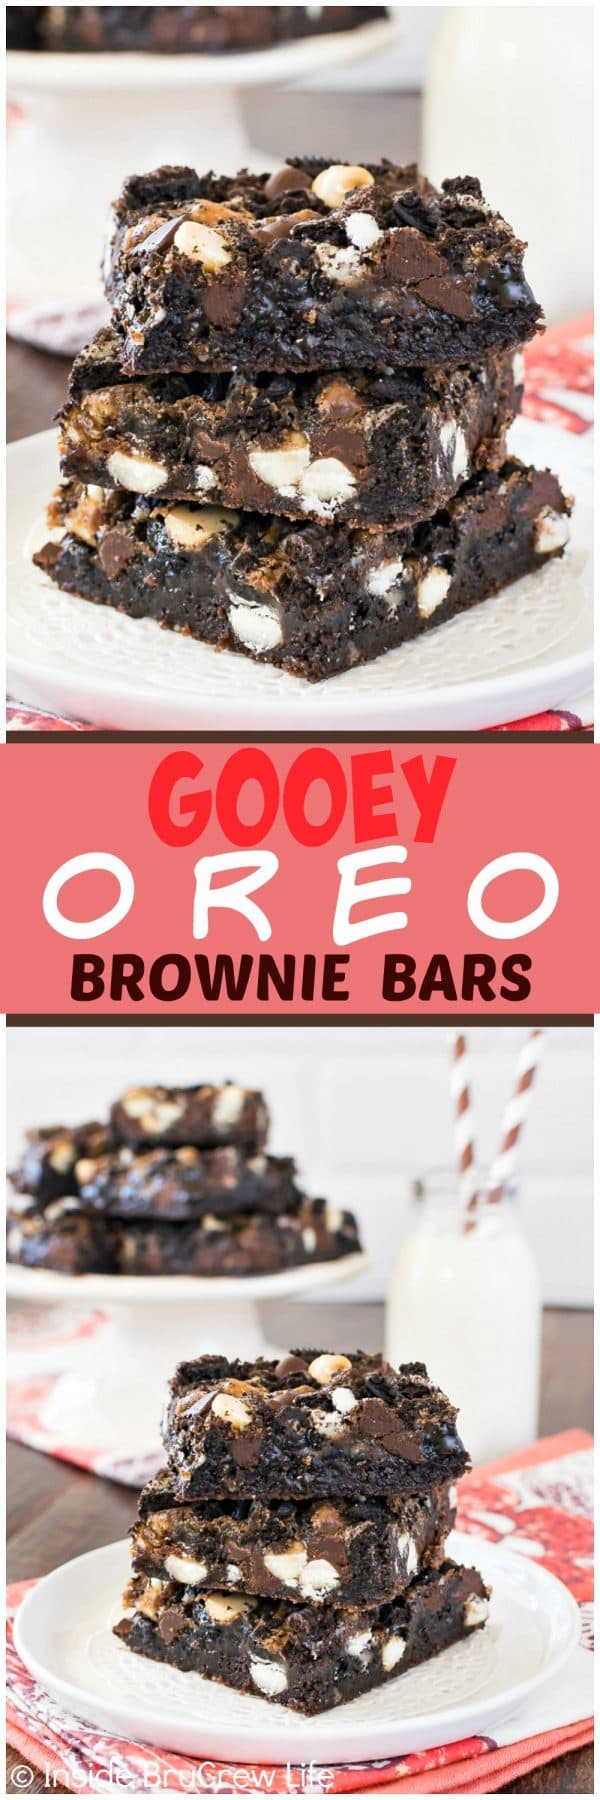 Gooey Oreo Brownie Bars - these easy brownies are loaded with Oreo cookie chunks and chocolate chips. This fudgy dessert recipe is perfect for when you need a chocolate fix!